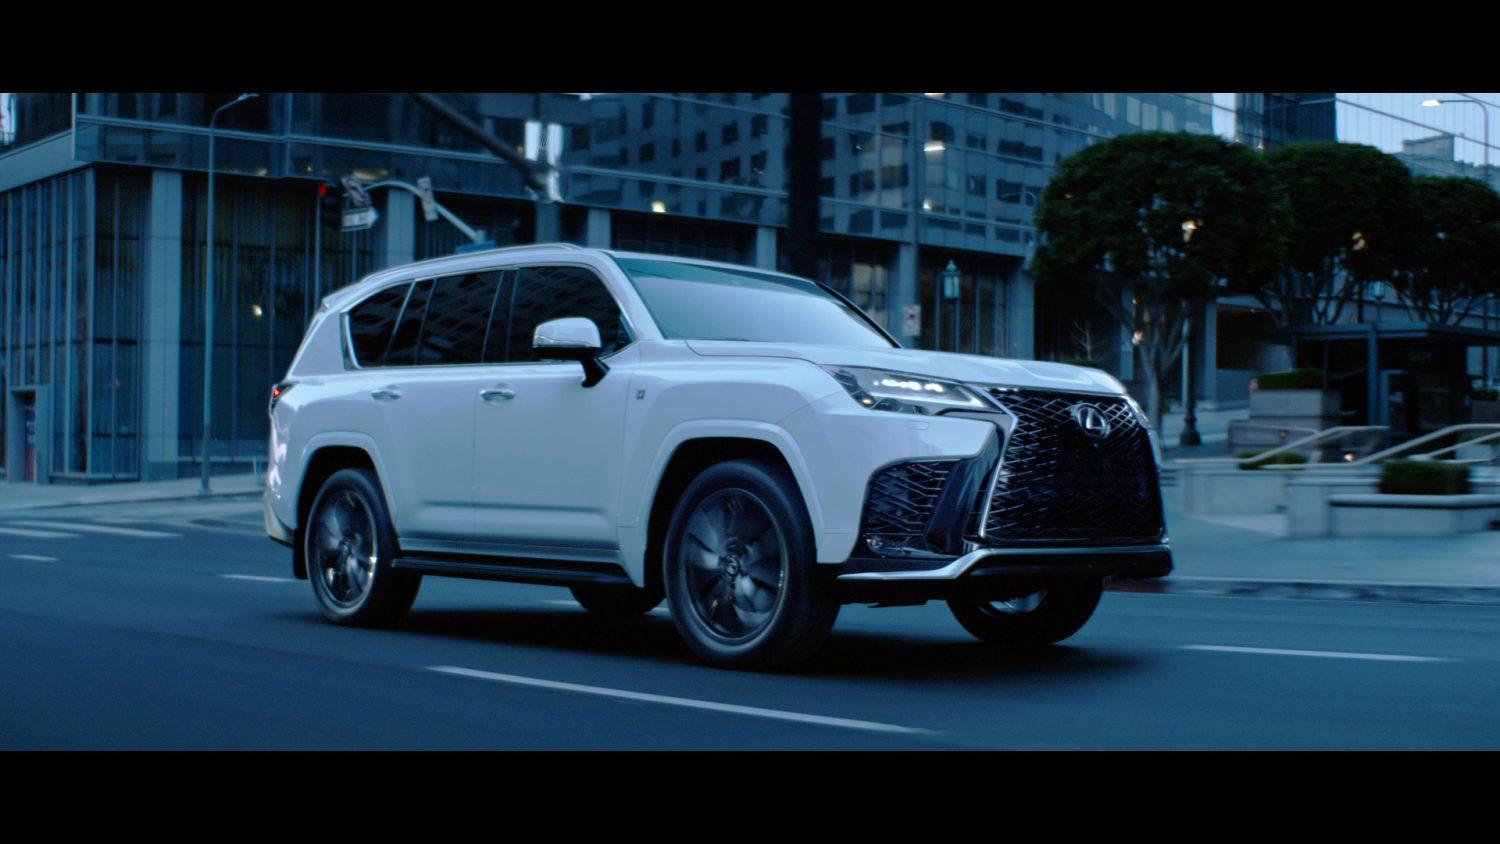 More information about "‘NO MOMENT TOO BIG’ FOR ALL-NEW LX 600 FLAGSHIP SUV"